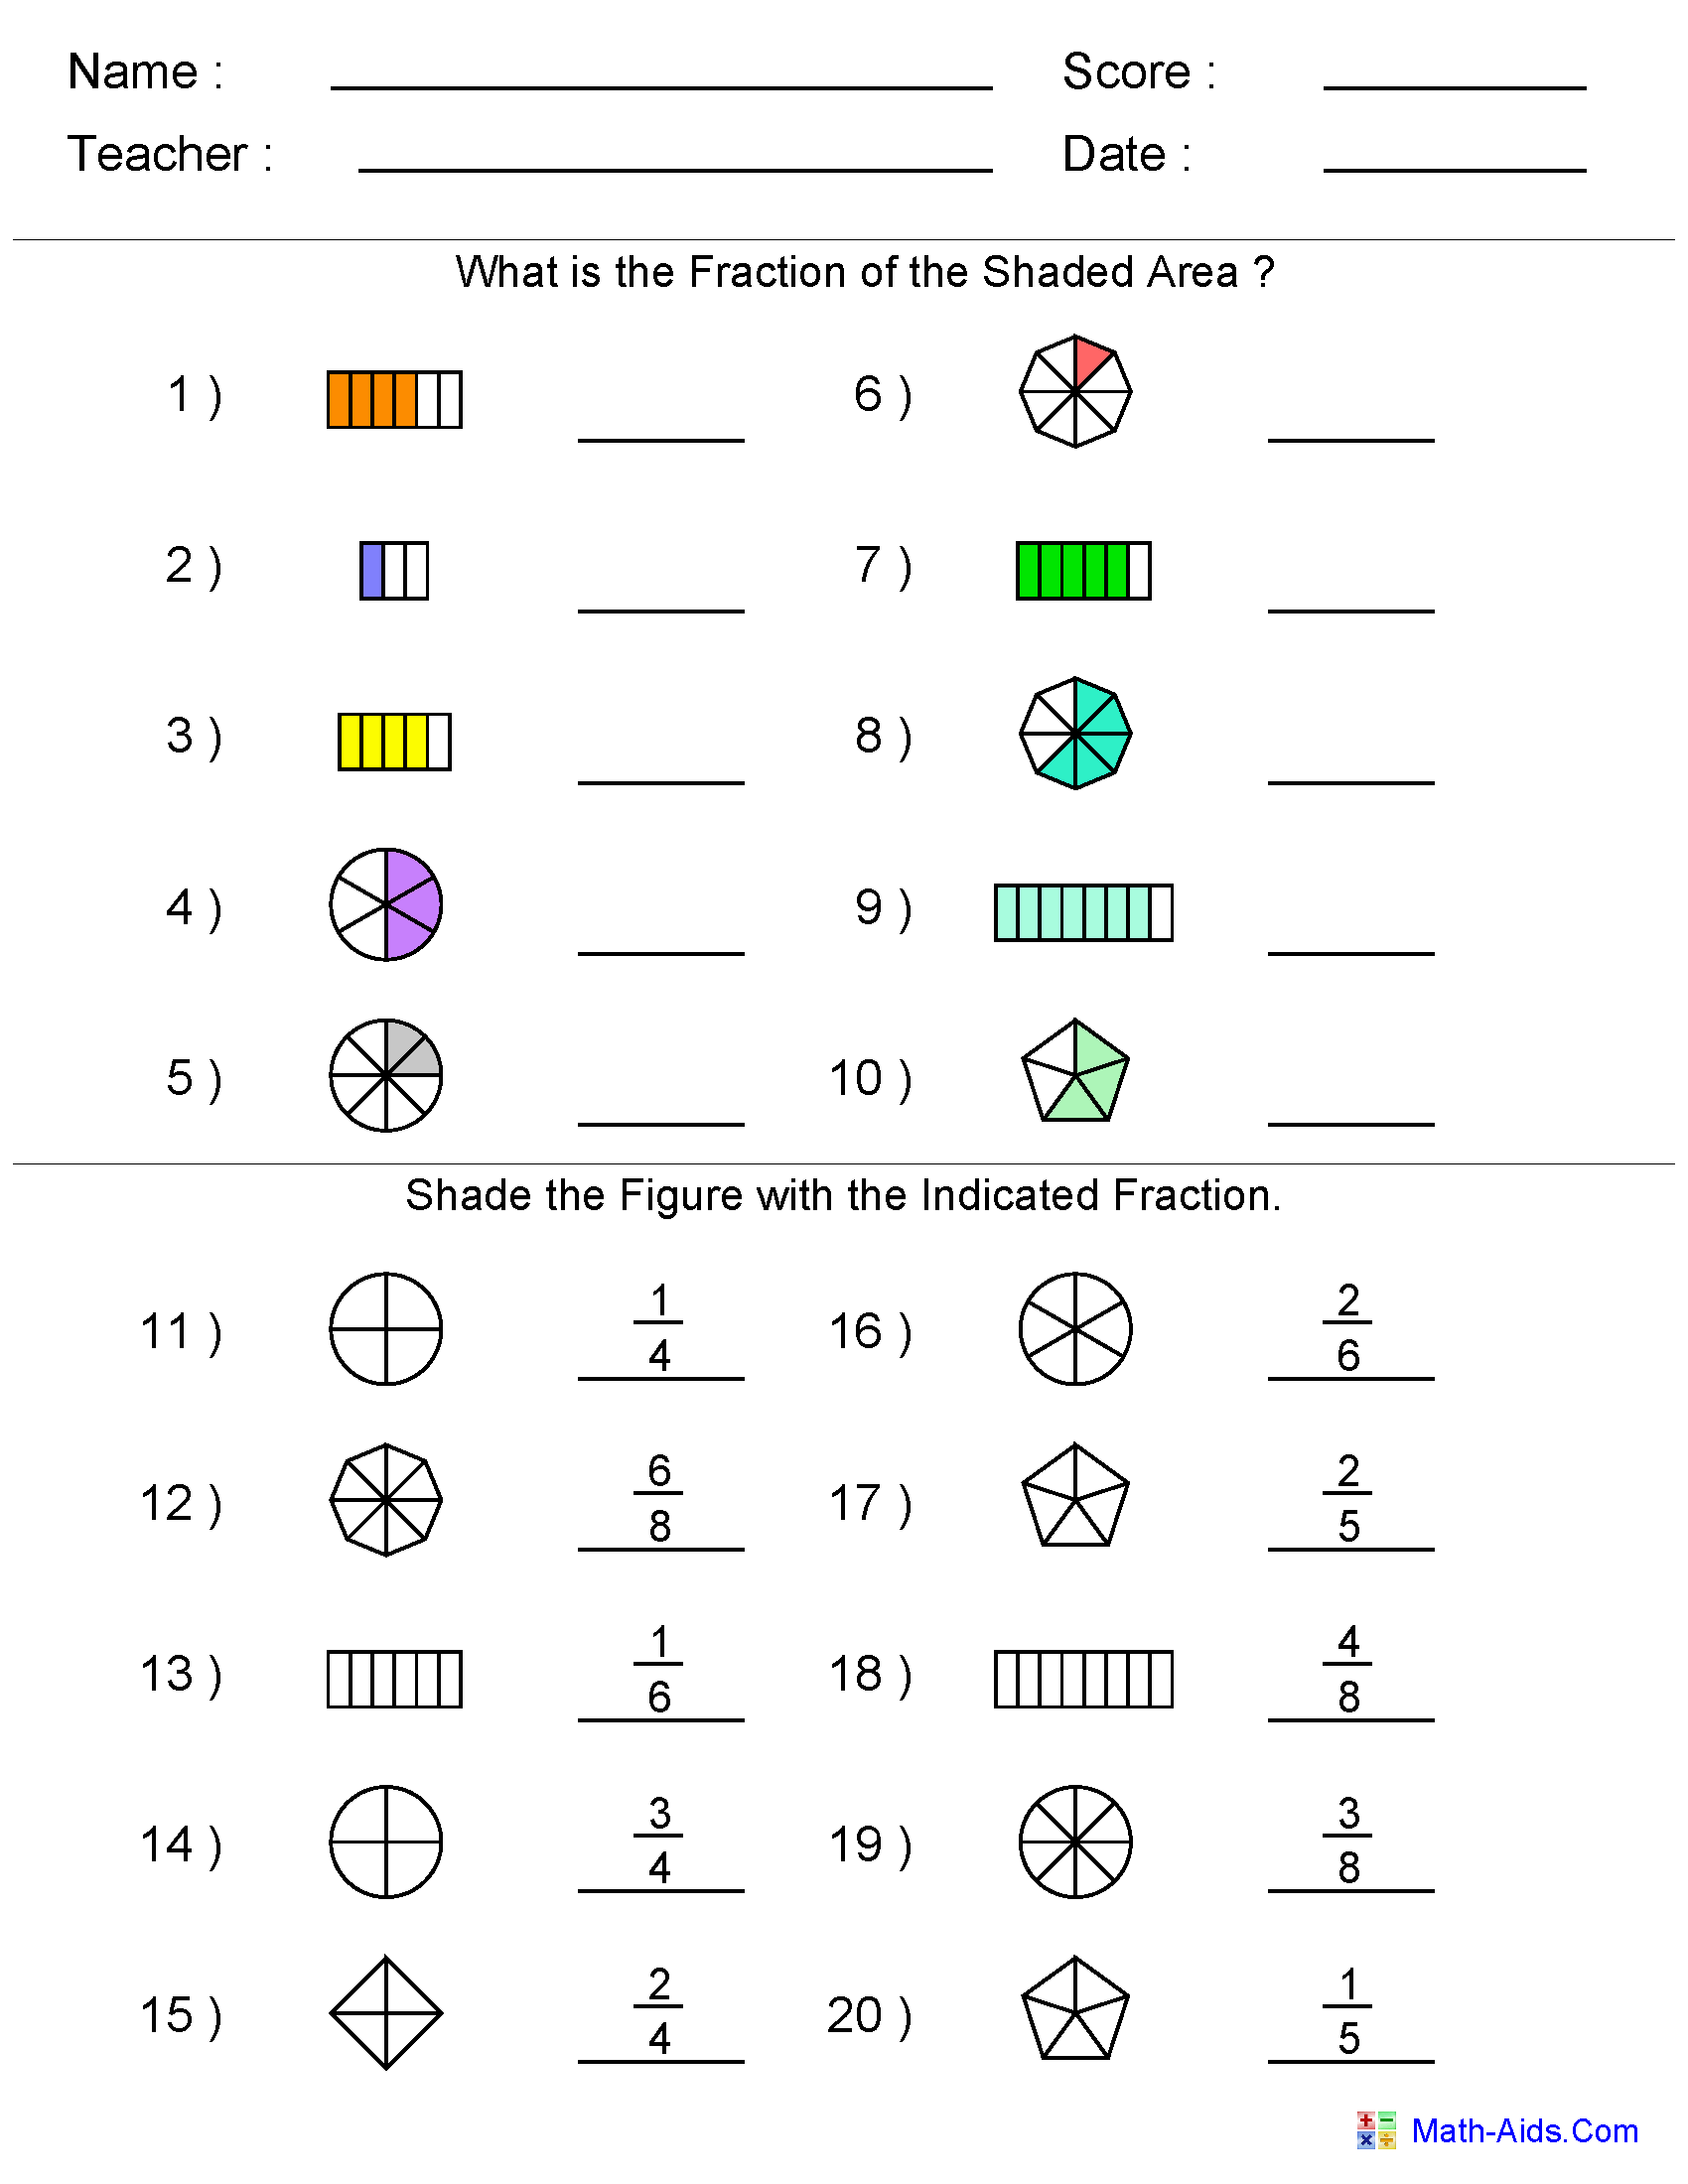 fractions-worksheets-grade-5-with-answers-tutore-org-master-of